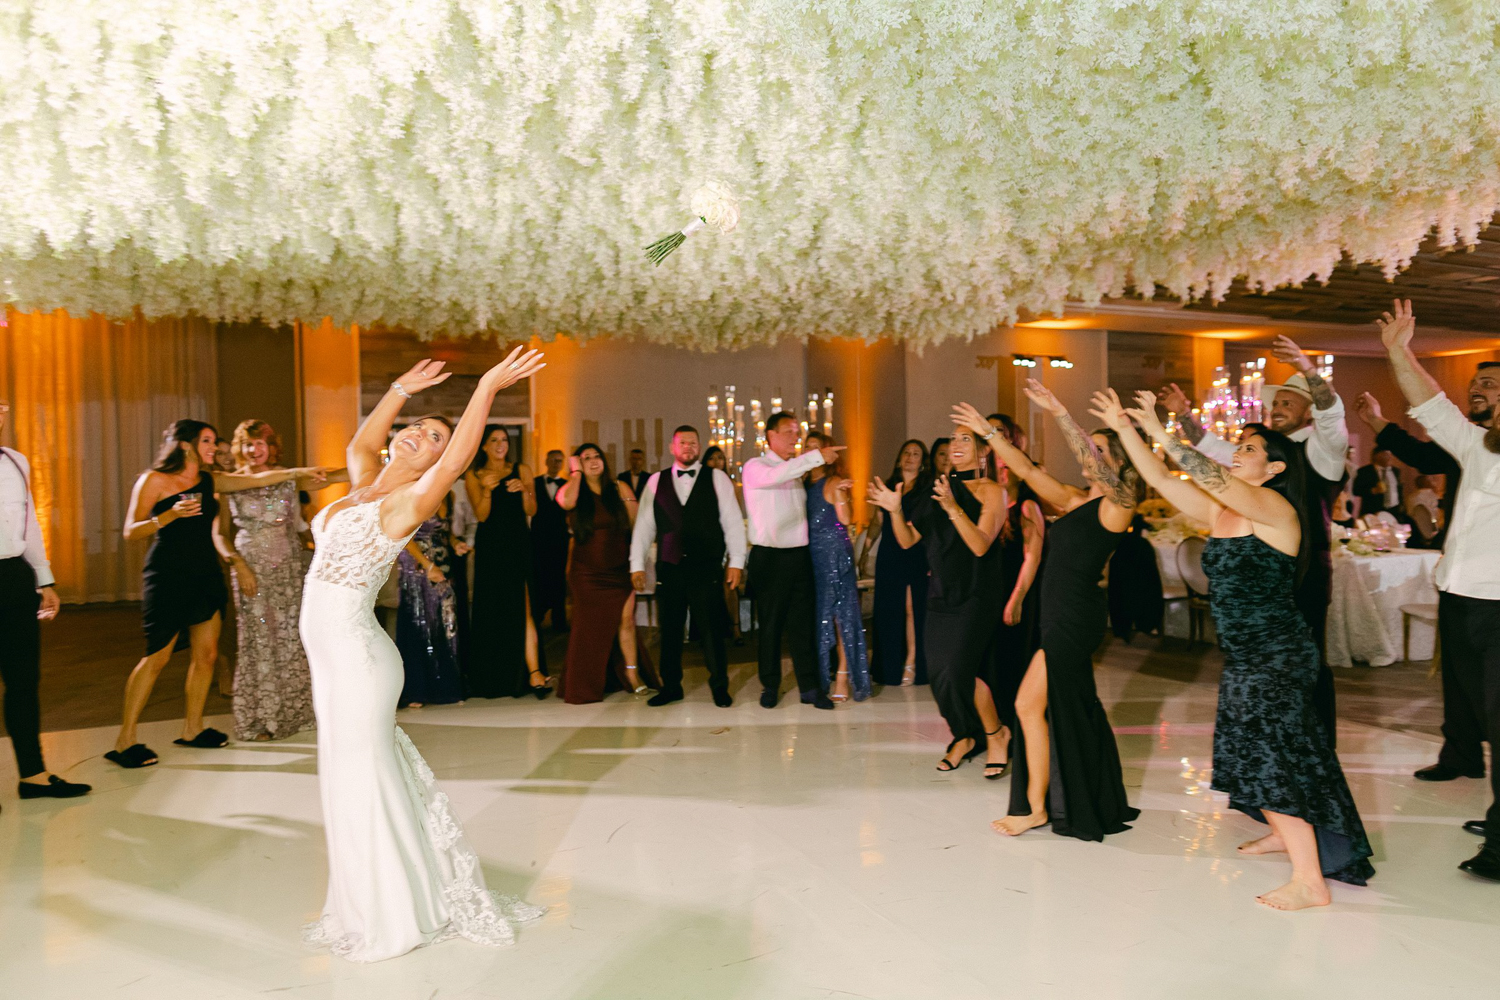 Bride tossing the bouquet to bridesmaids under the white orchid ceiling installation